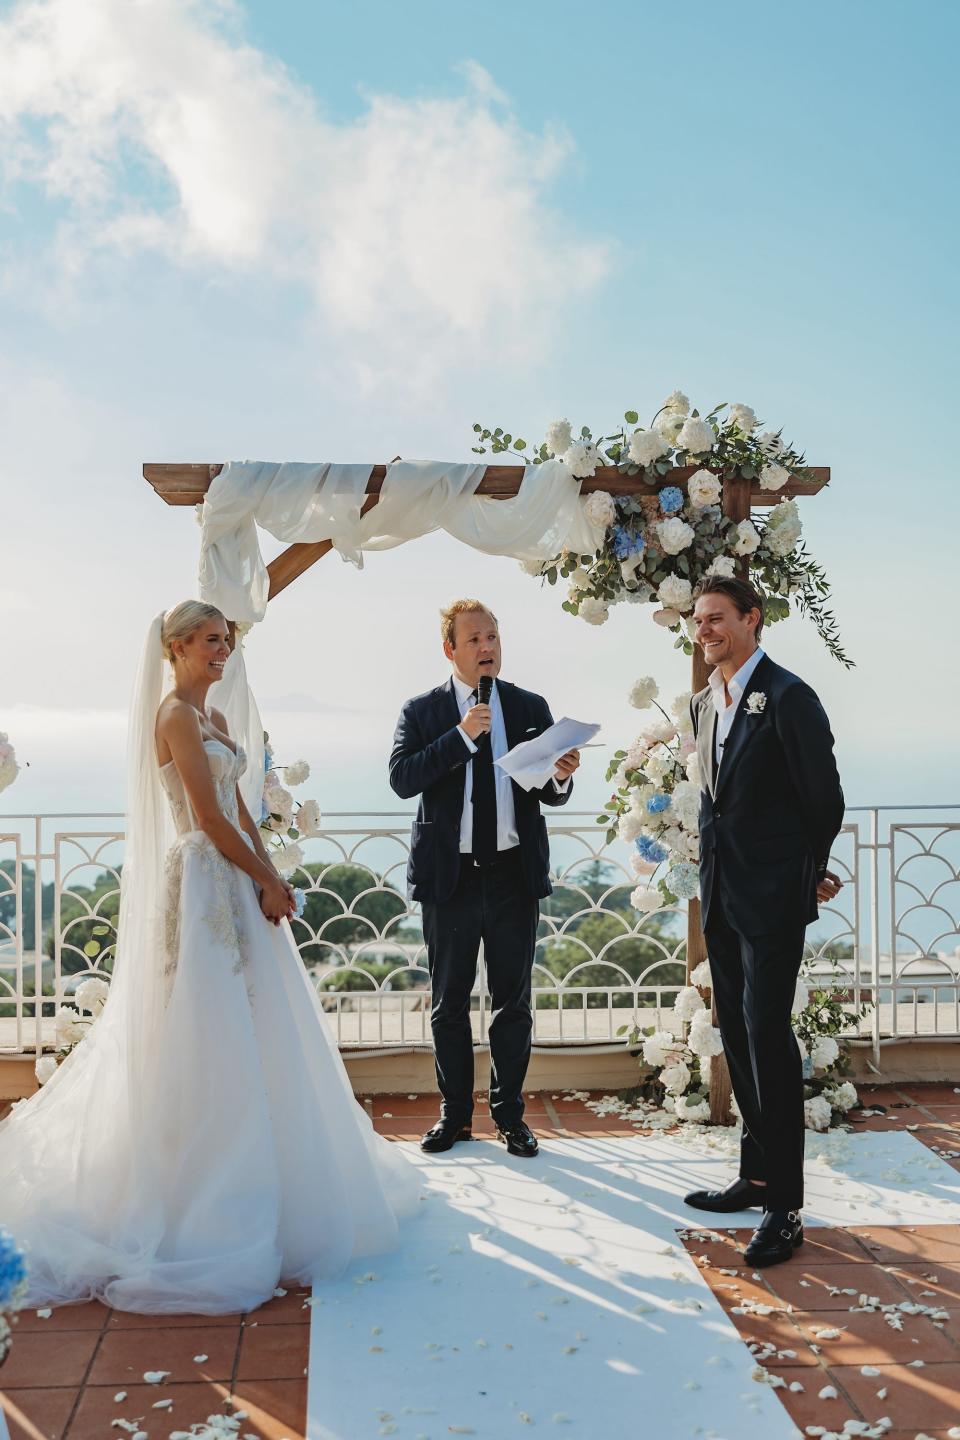 A bride and groom say their vows in front of a floral archway and the ocean.